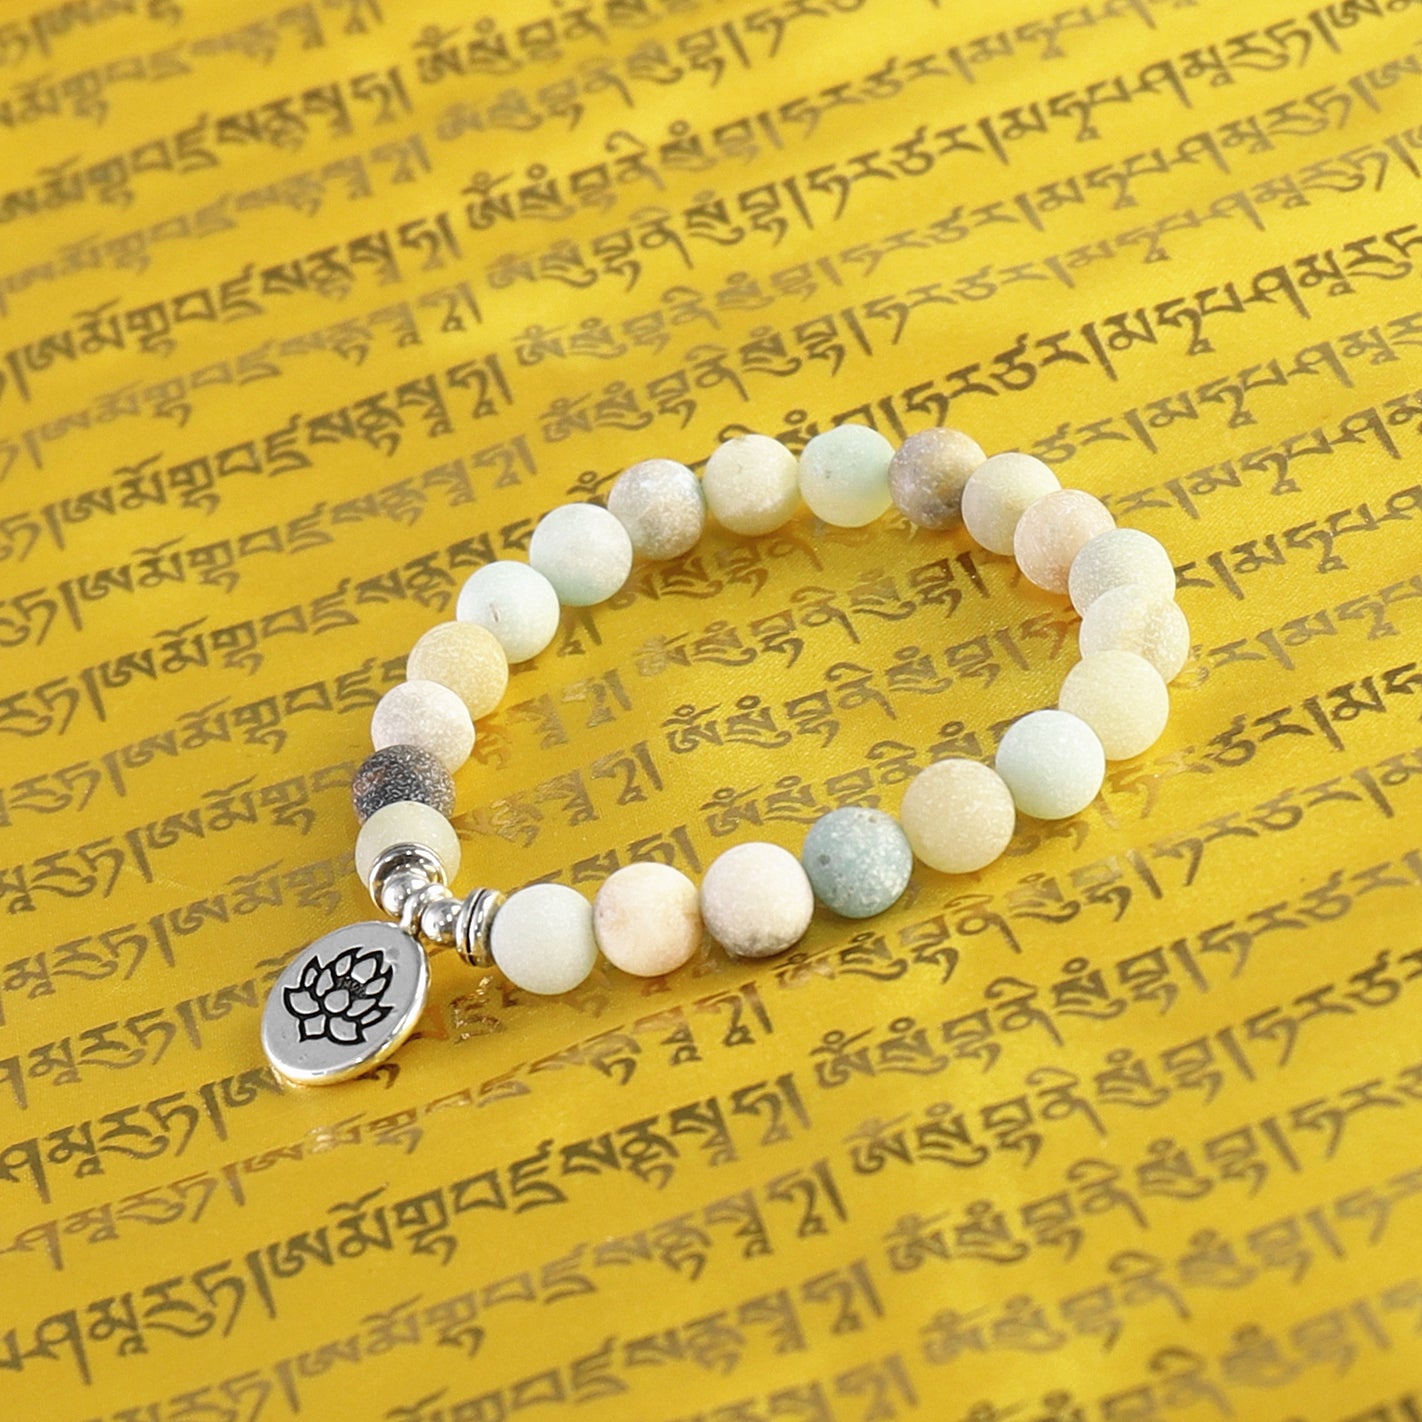 Buddhist Handcrafted Nature Sandalwood Bracelet for "Purity & stillness of the body, speech, & mind" - Made of Amazonite Blessed Beads